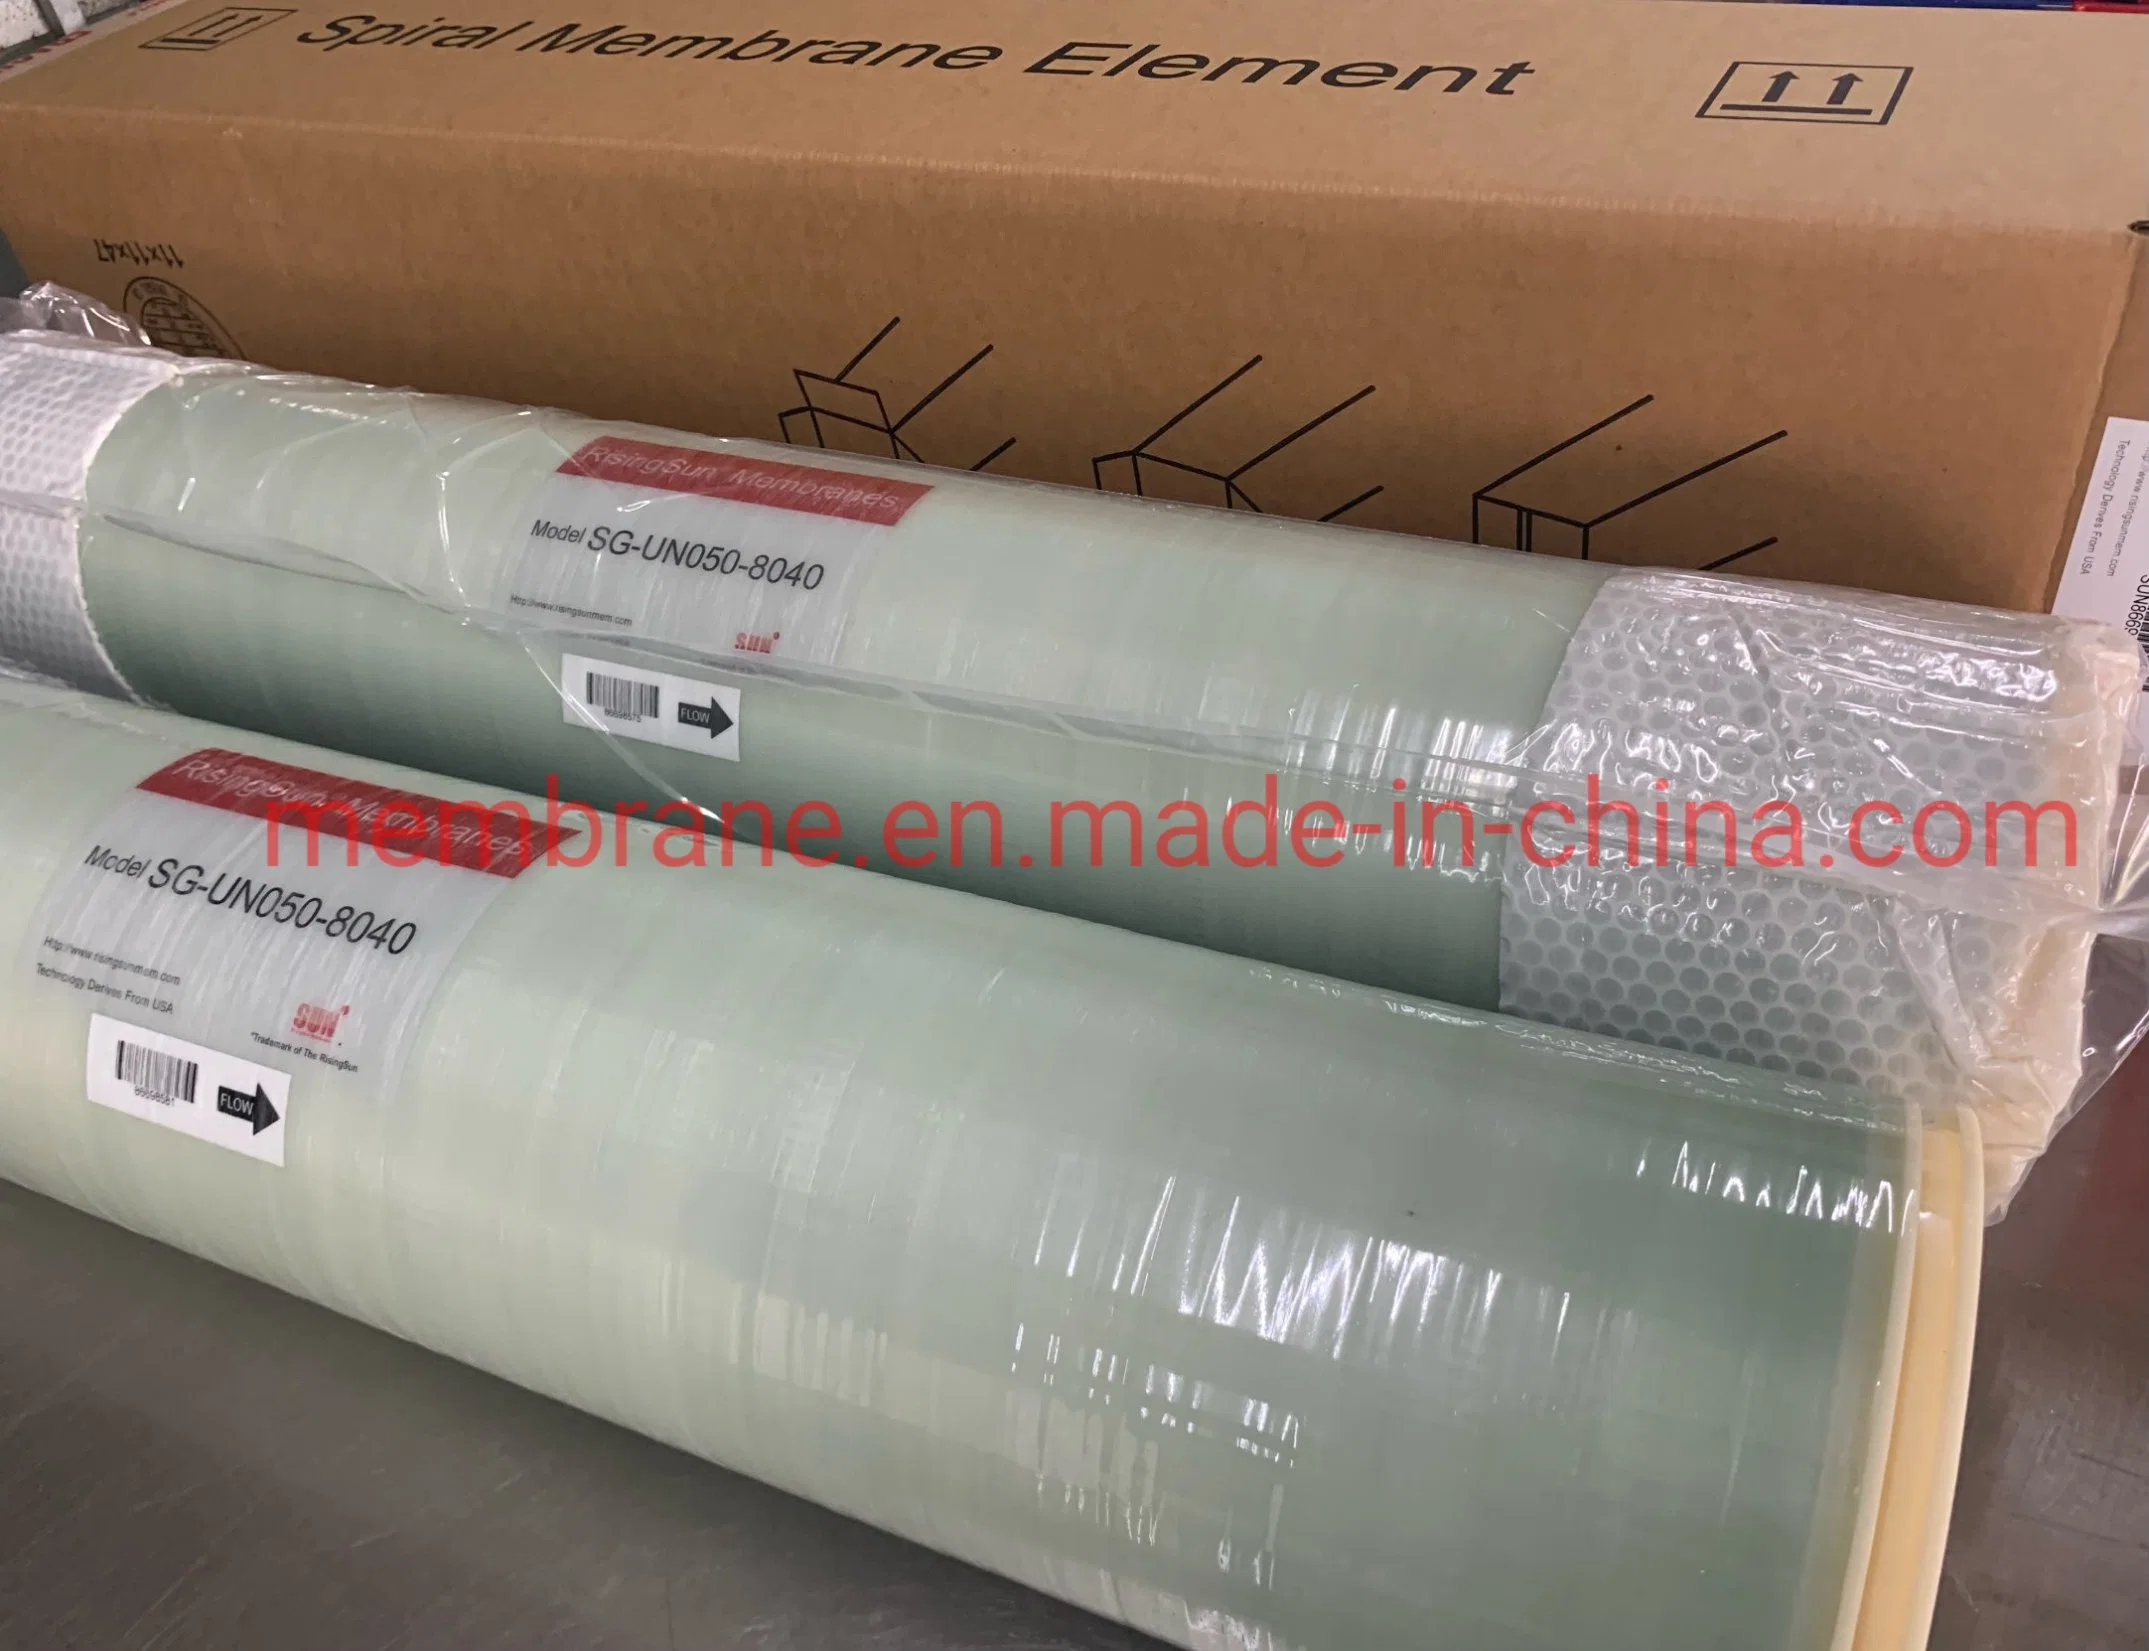 SG-UN050-8040 for oil water separation, analog Suez / GE MW8040F50